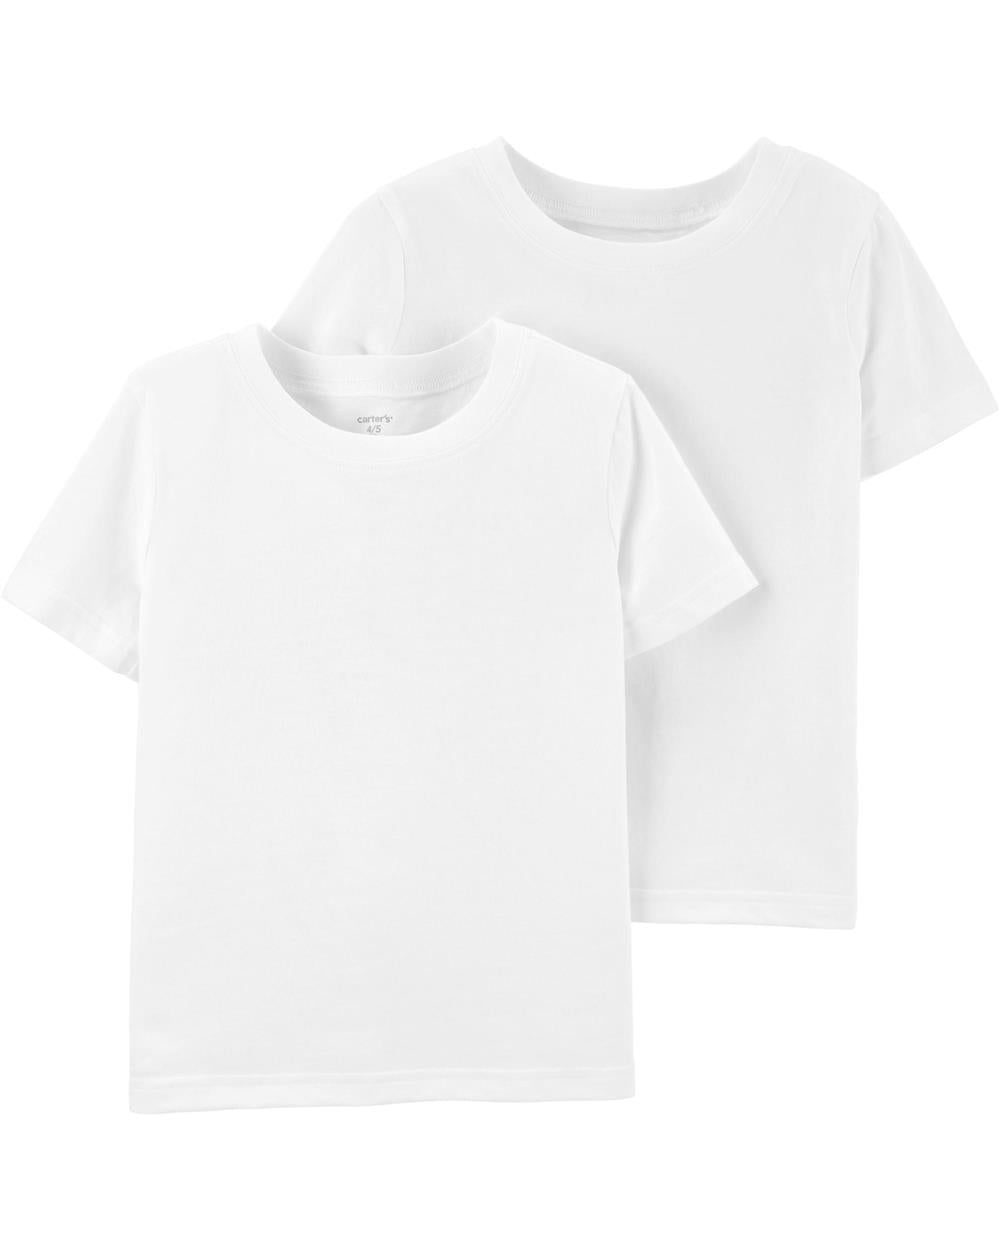 Carters Boys 2-14 2-Pack Cotton Undershirts